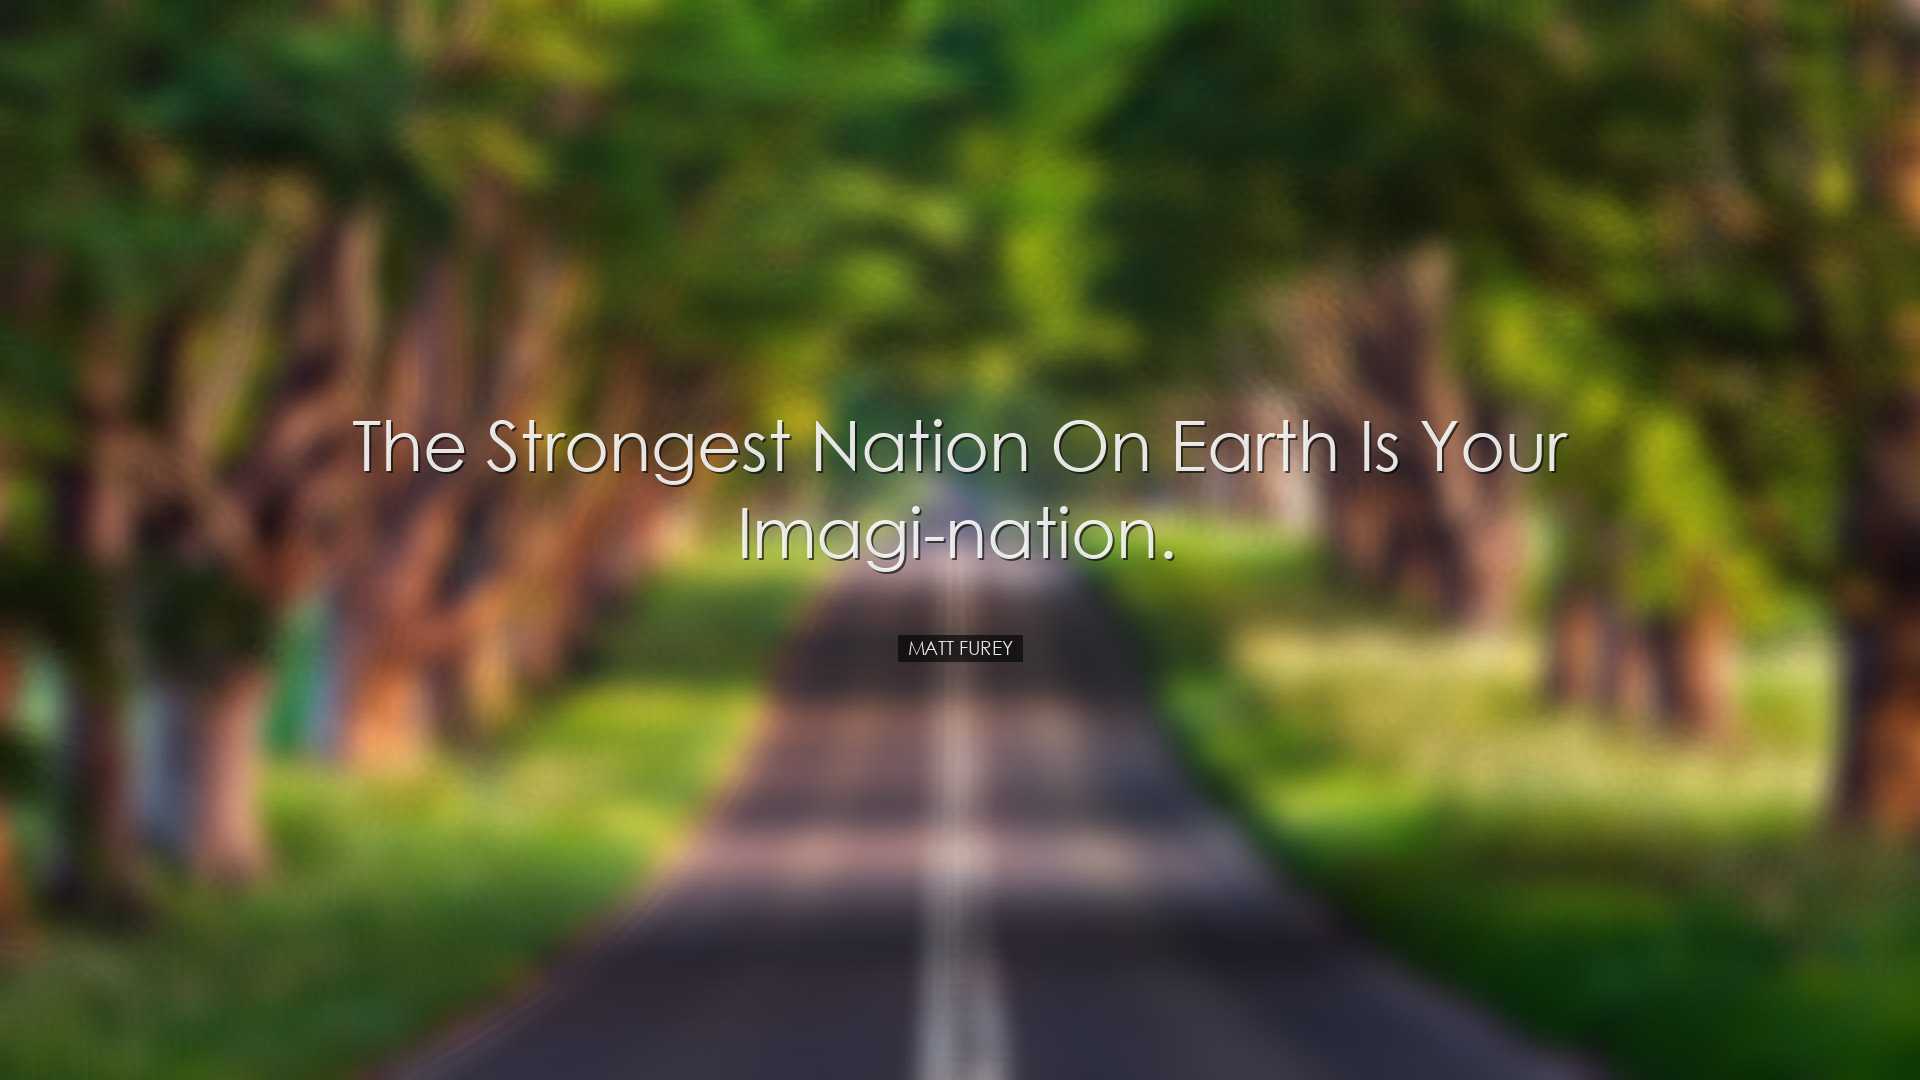 The strongest nation on earth is your imagi-nation. - Matt Furey